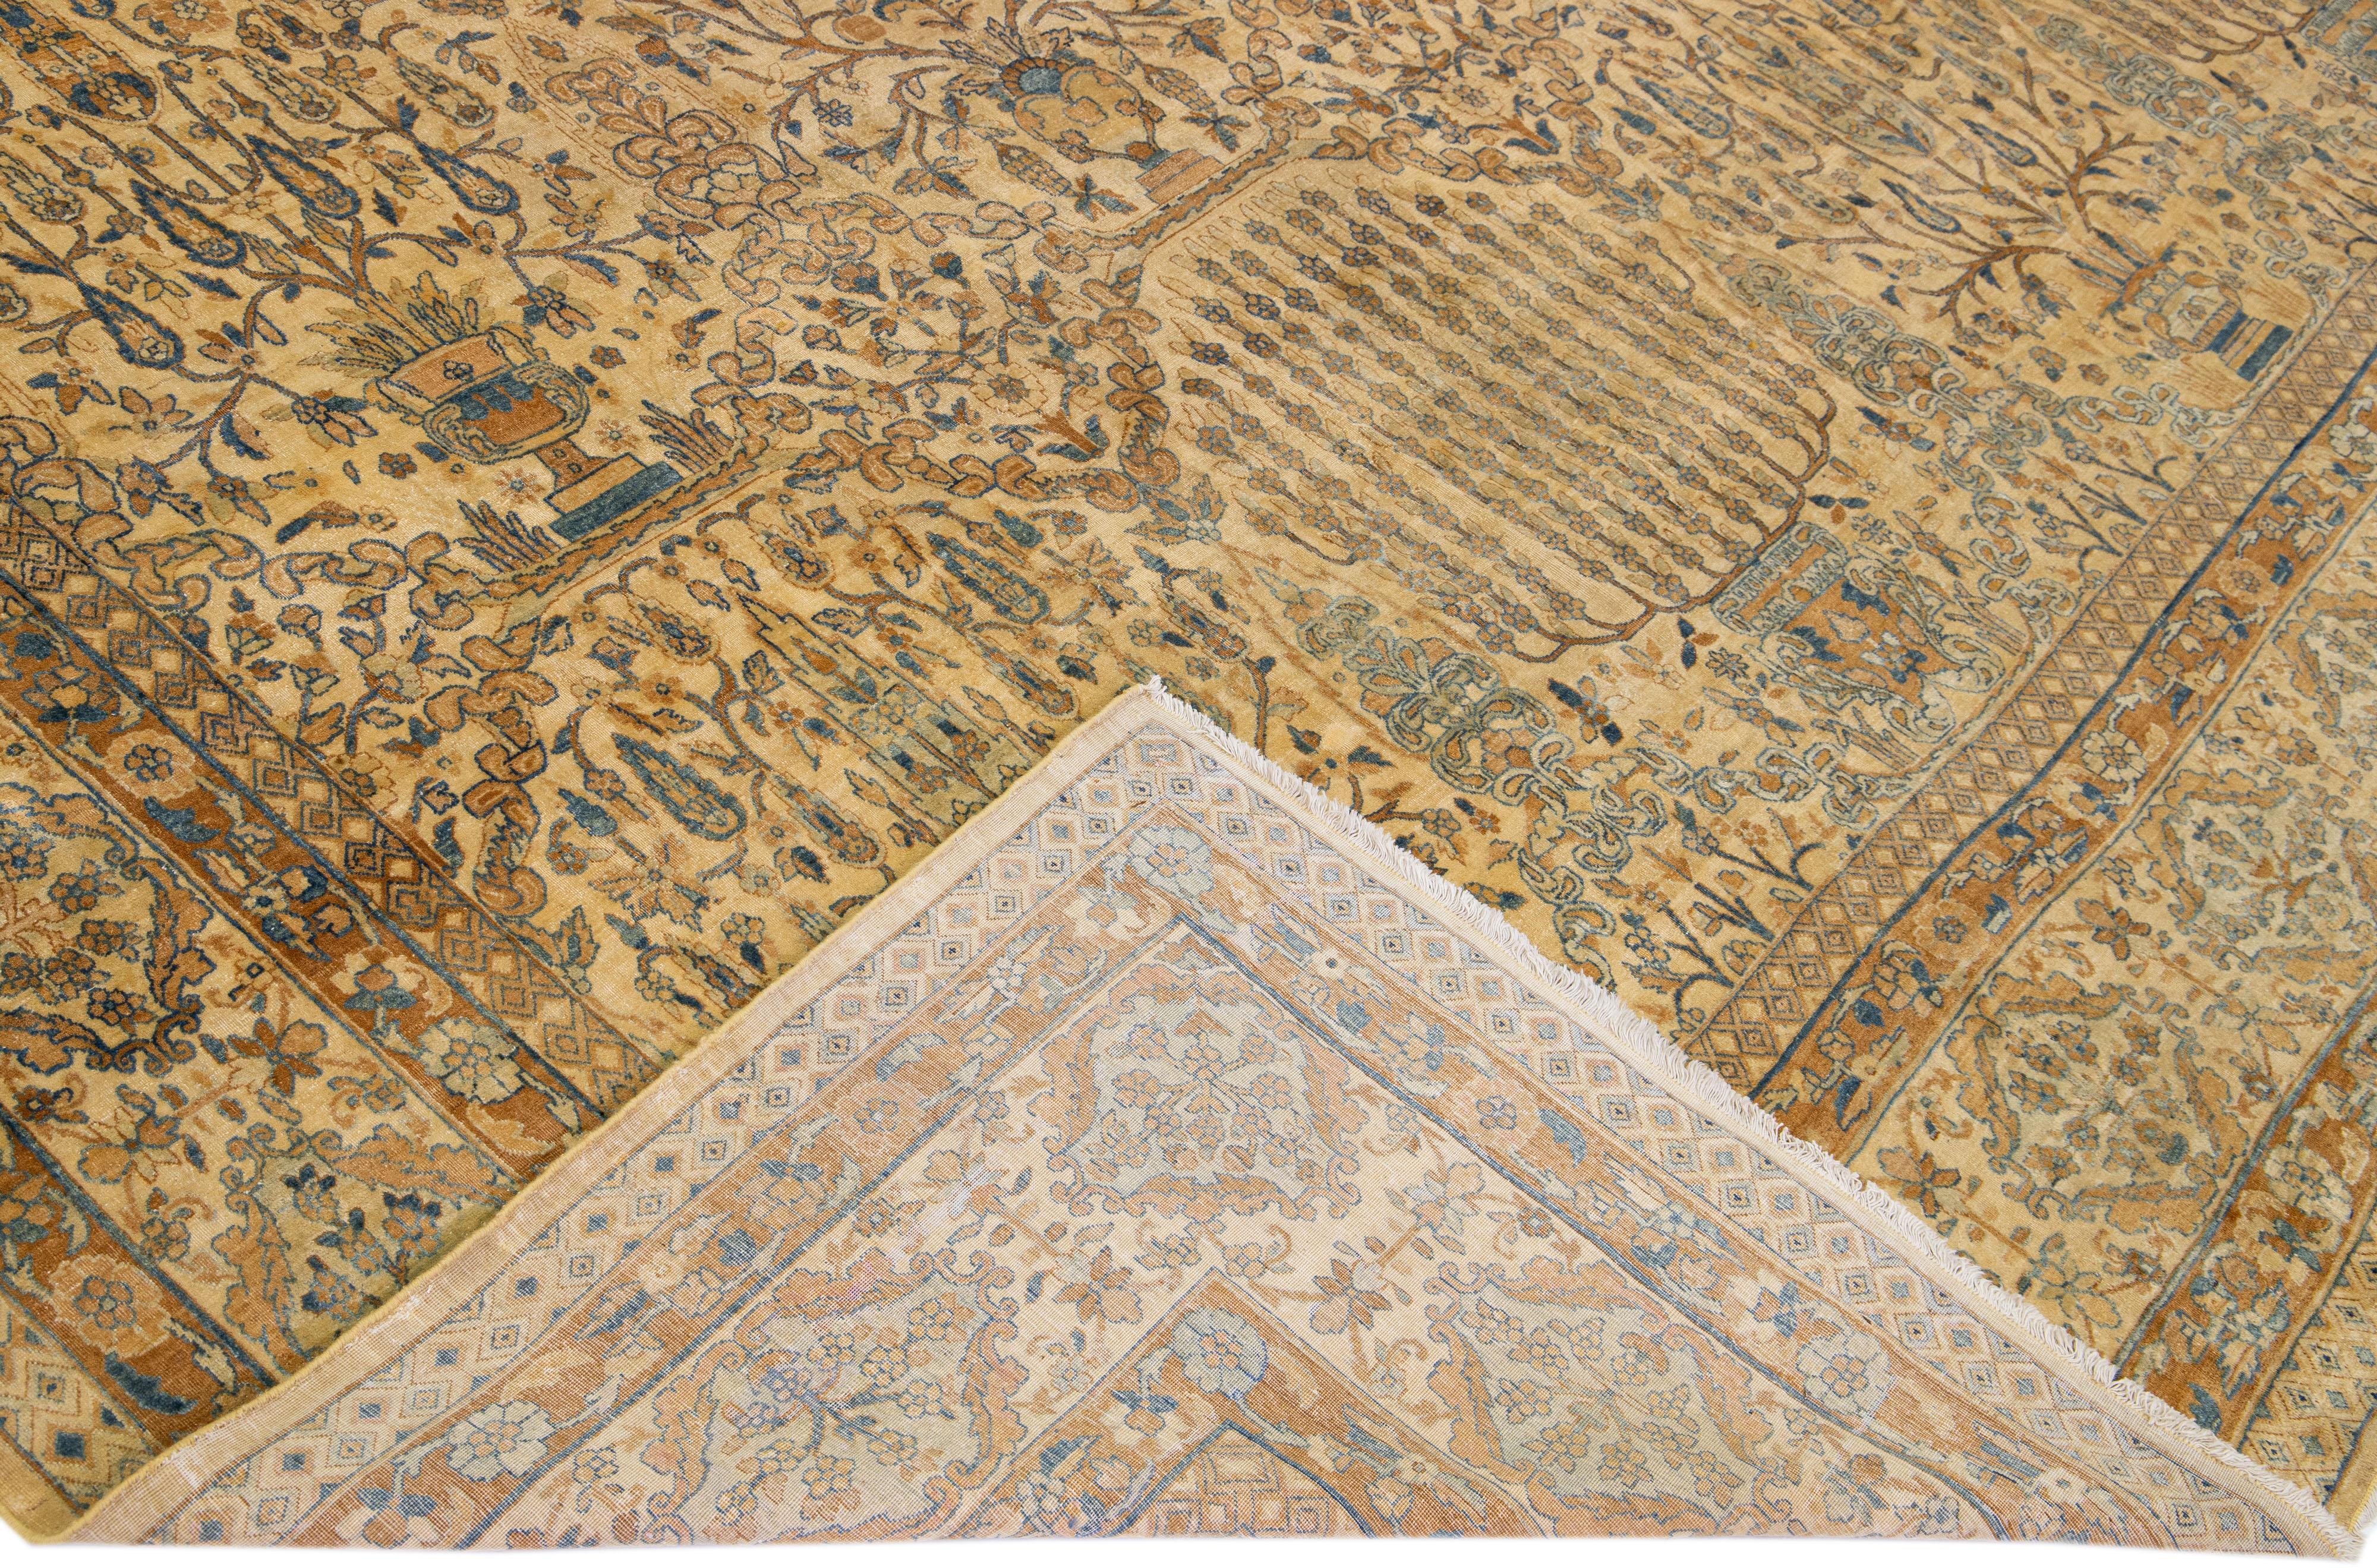 Beautiful antique Kerman hand-knotted rug with a goldenrod field. This Persian rug has blue accents all over the gorgeous Botanical Floral design.

This rug measures 12'2